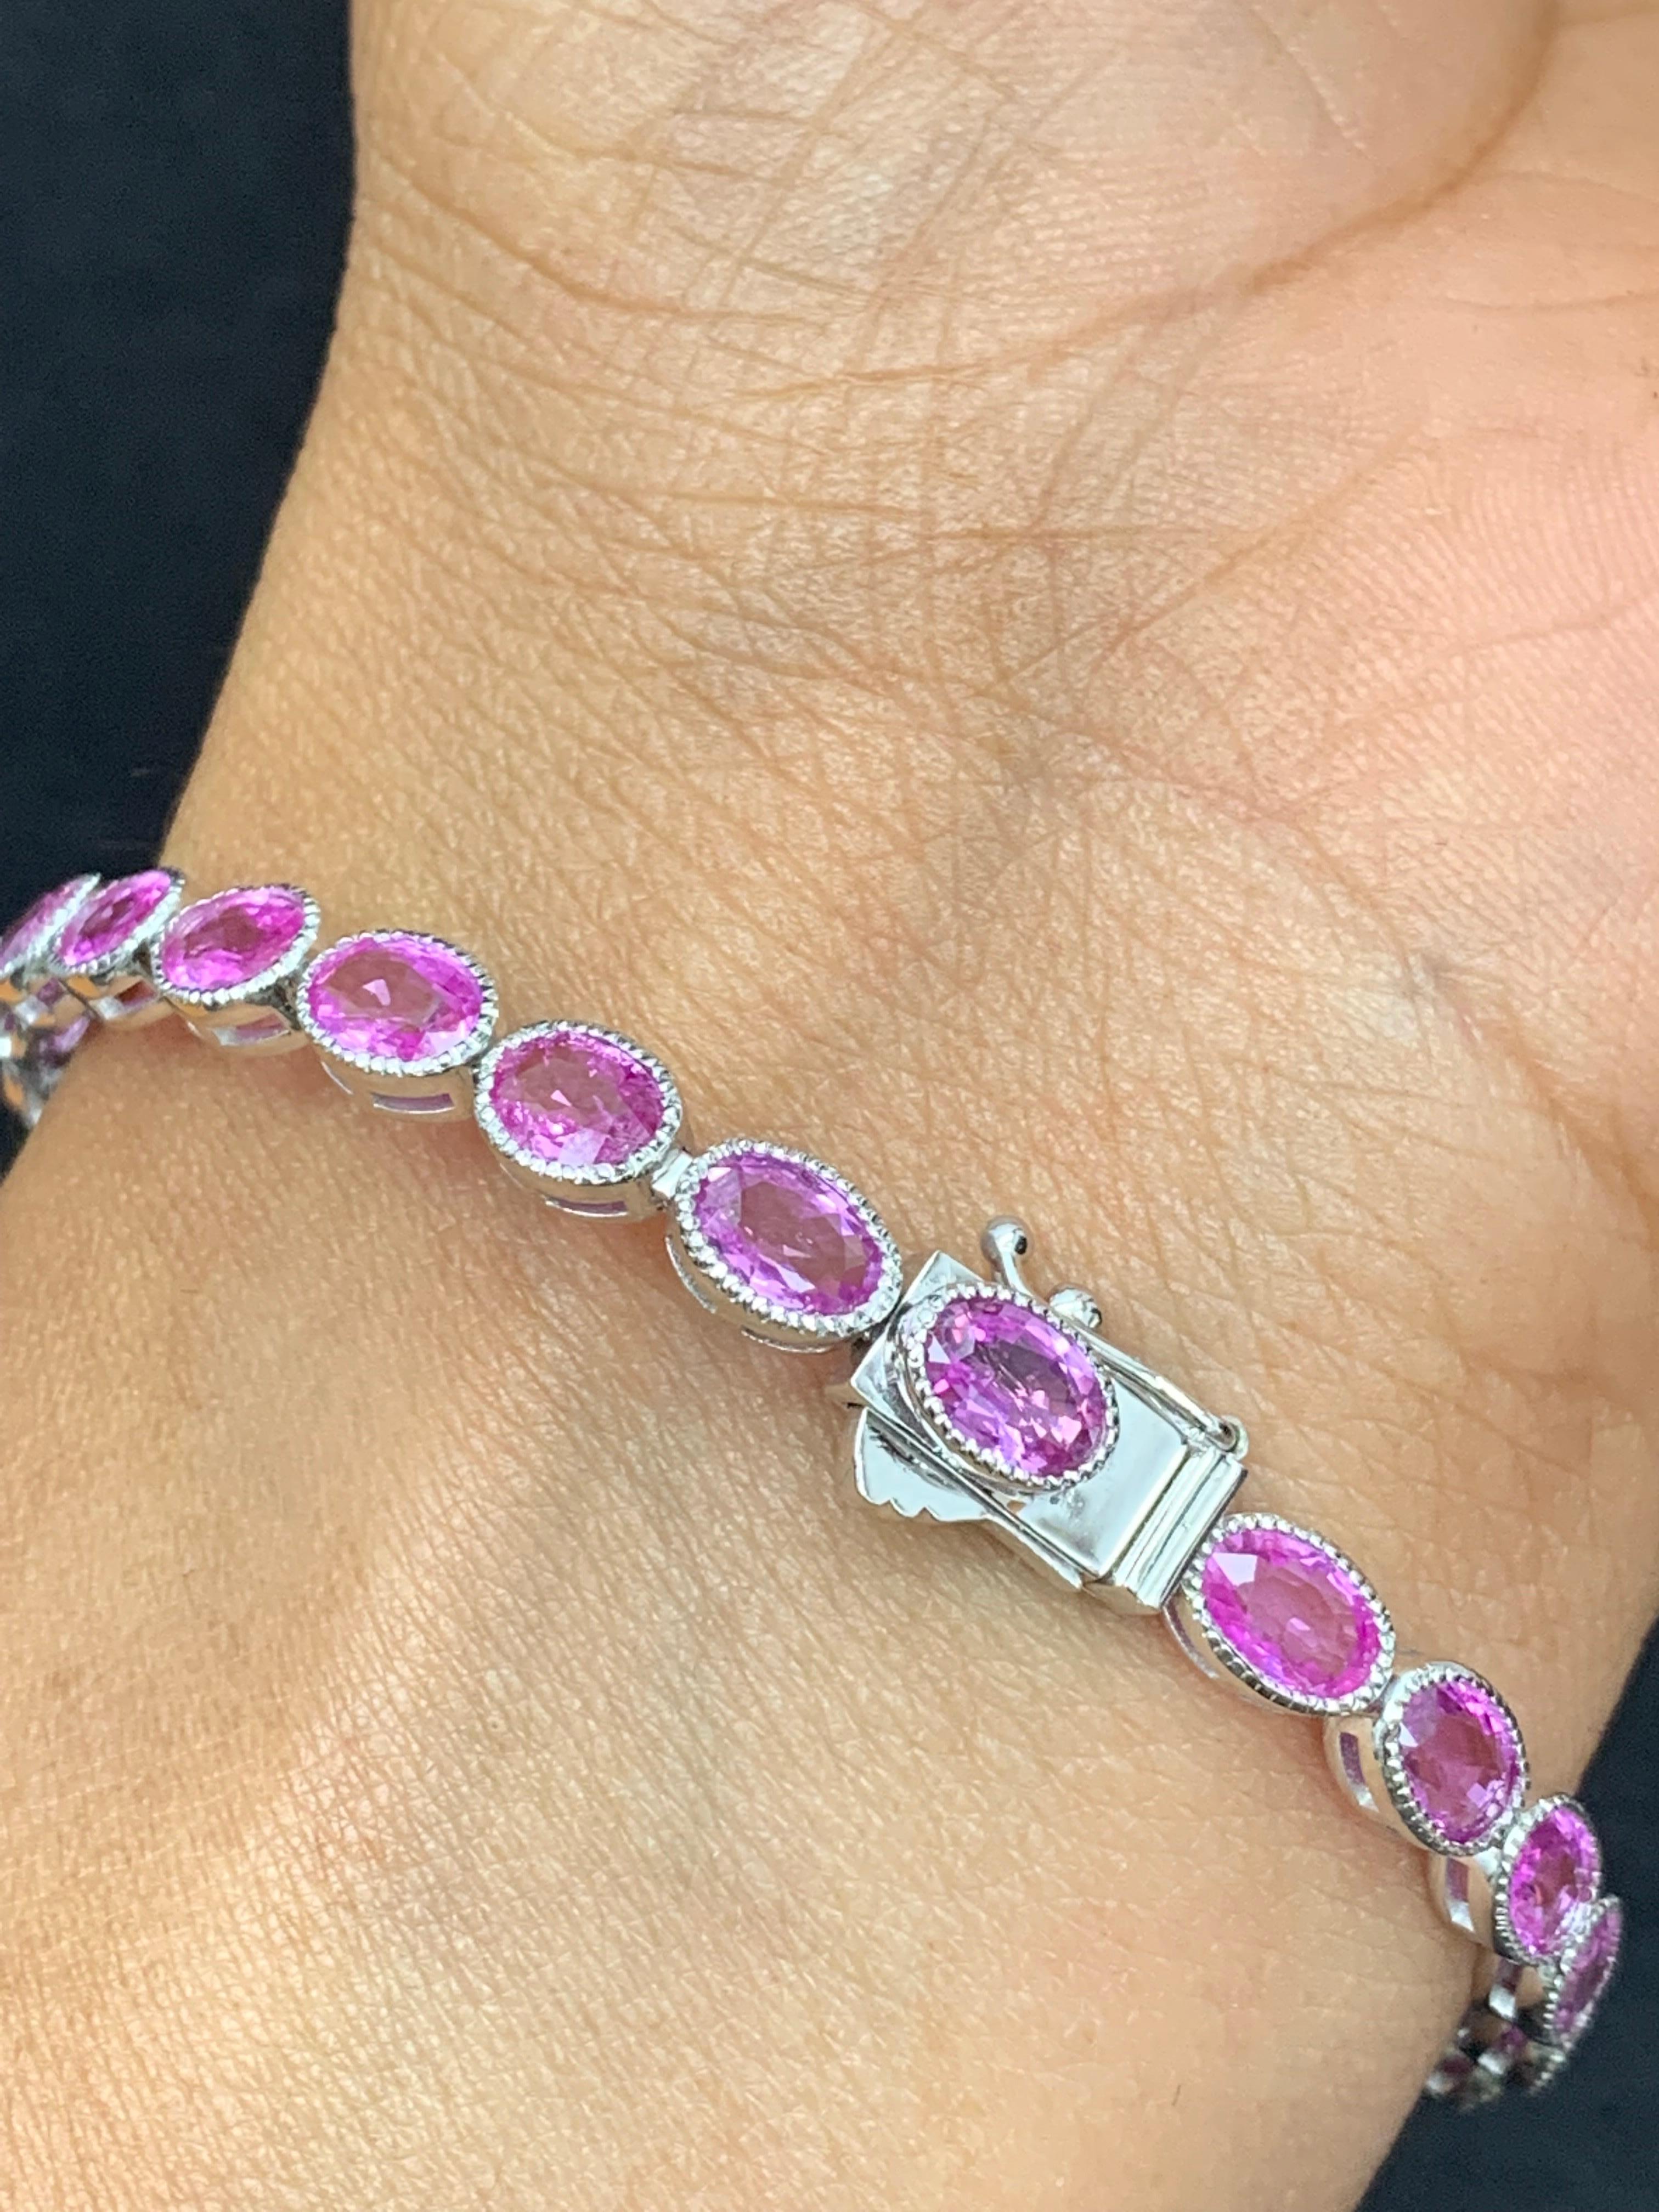 12.62 Carat Oval Cut Pink Sapphire and Diamond Tennis Bracelet in 14K White Gold For Sale 4